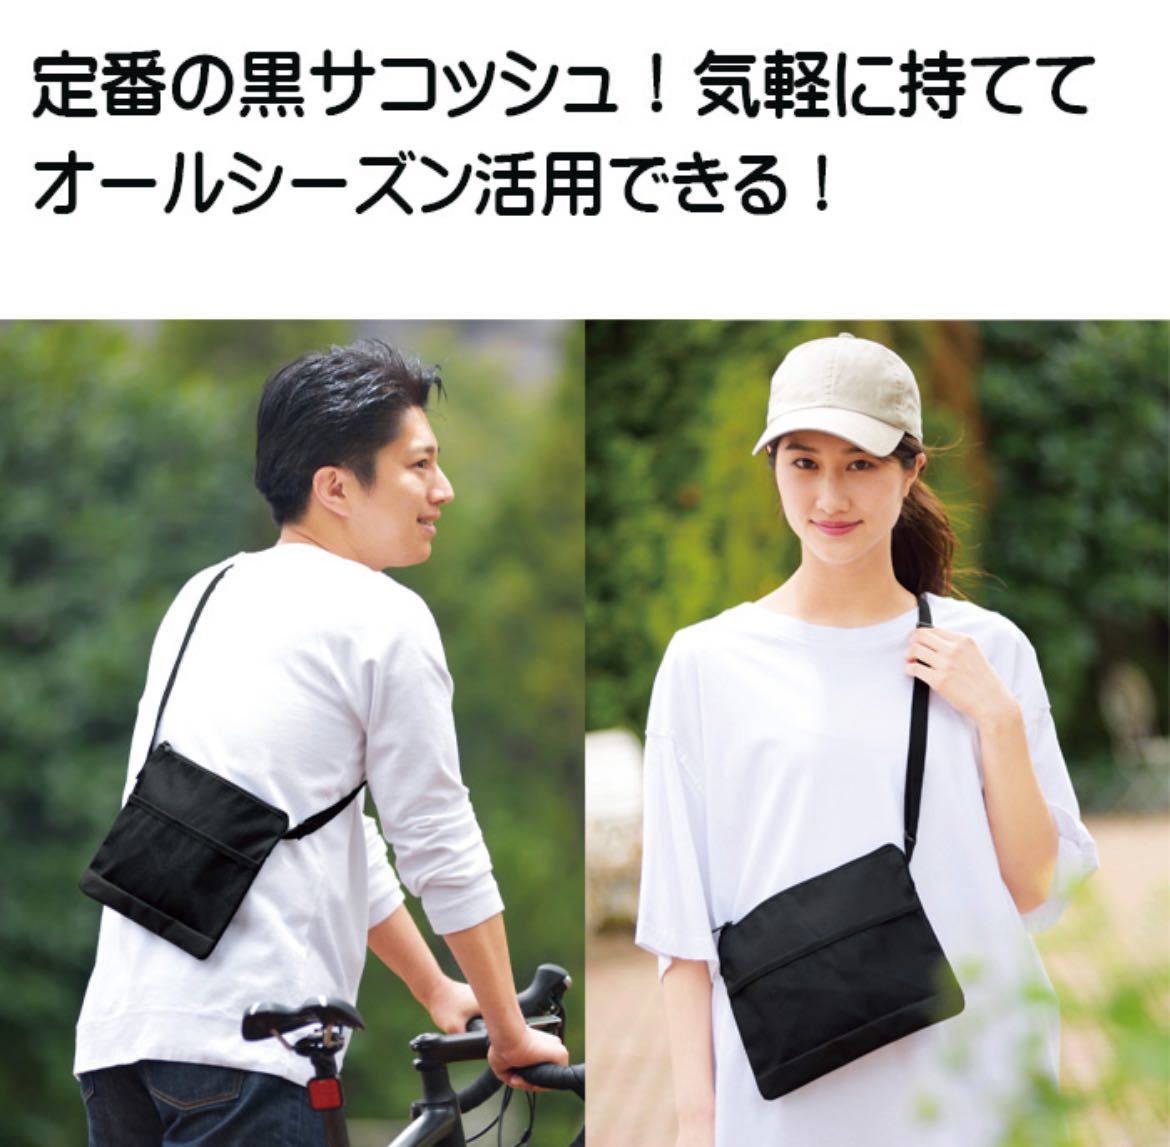 tei Lee sakoshusakoshu shoulder bag pouch cycling outing simple men's lady's man and woman use light weight 